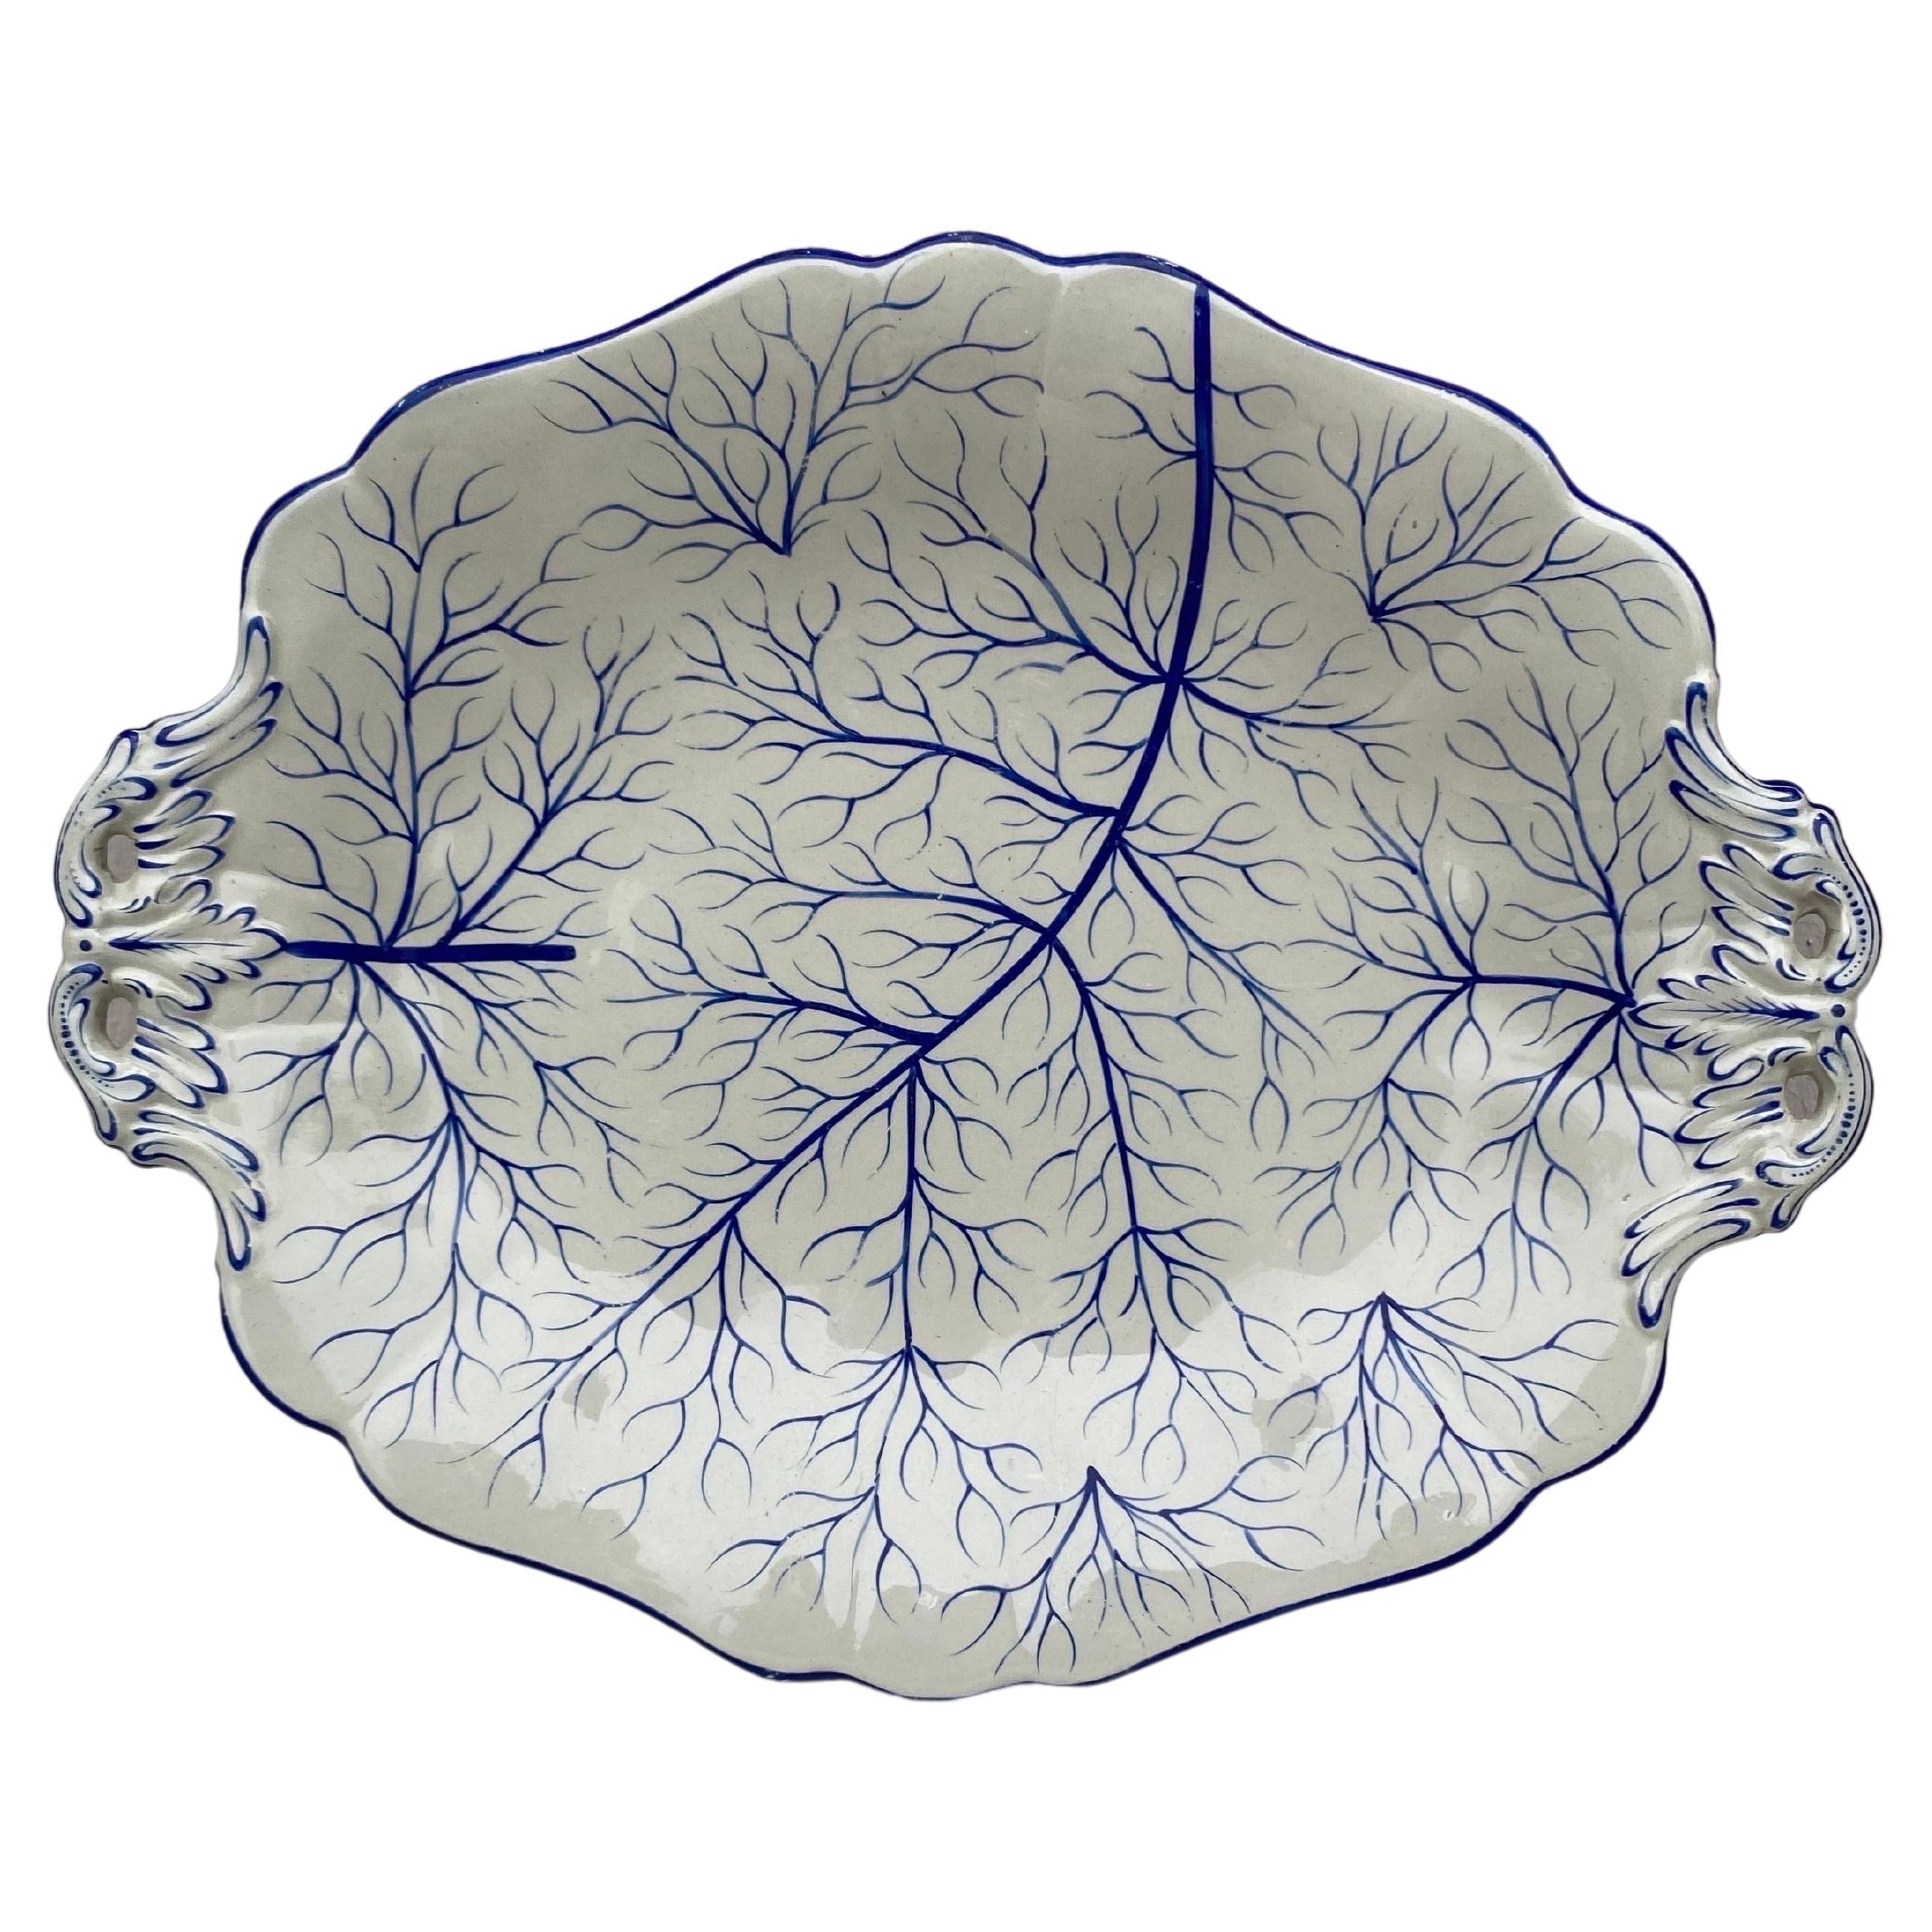 English Majolica oval blue and white platter, circa 1890.
Painted branches.
Measures: Length 11.7 inches on 9, height 1.5 inches.
Chip on the back.